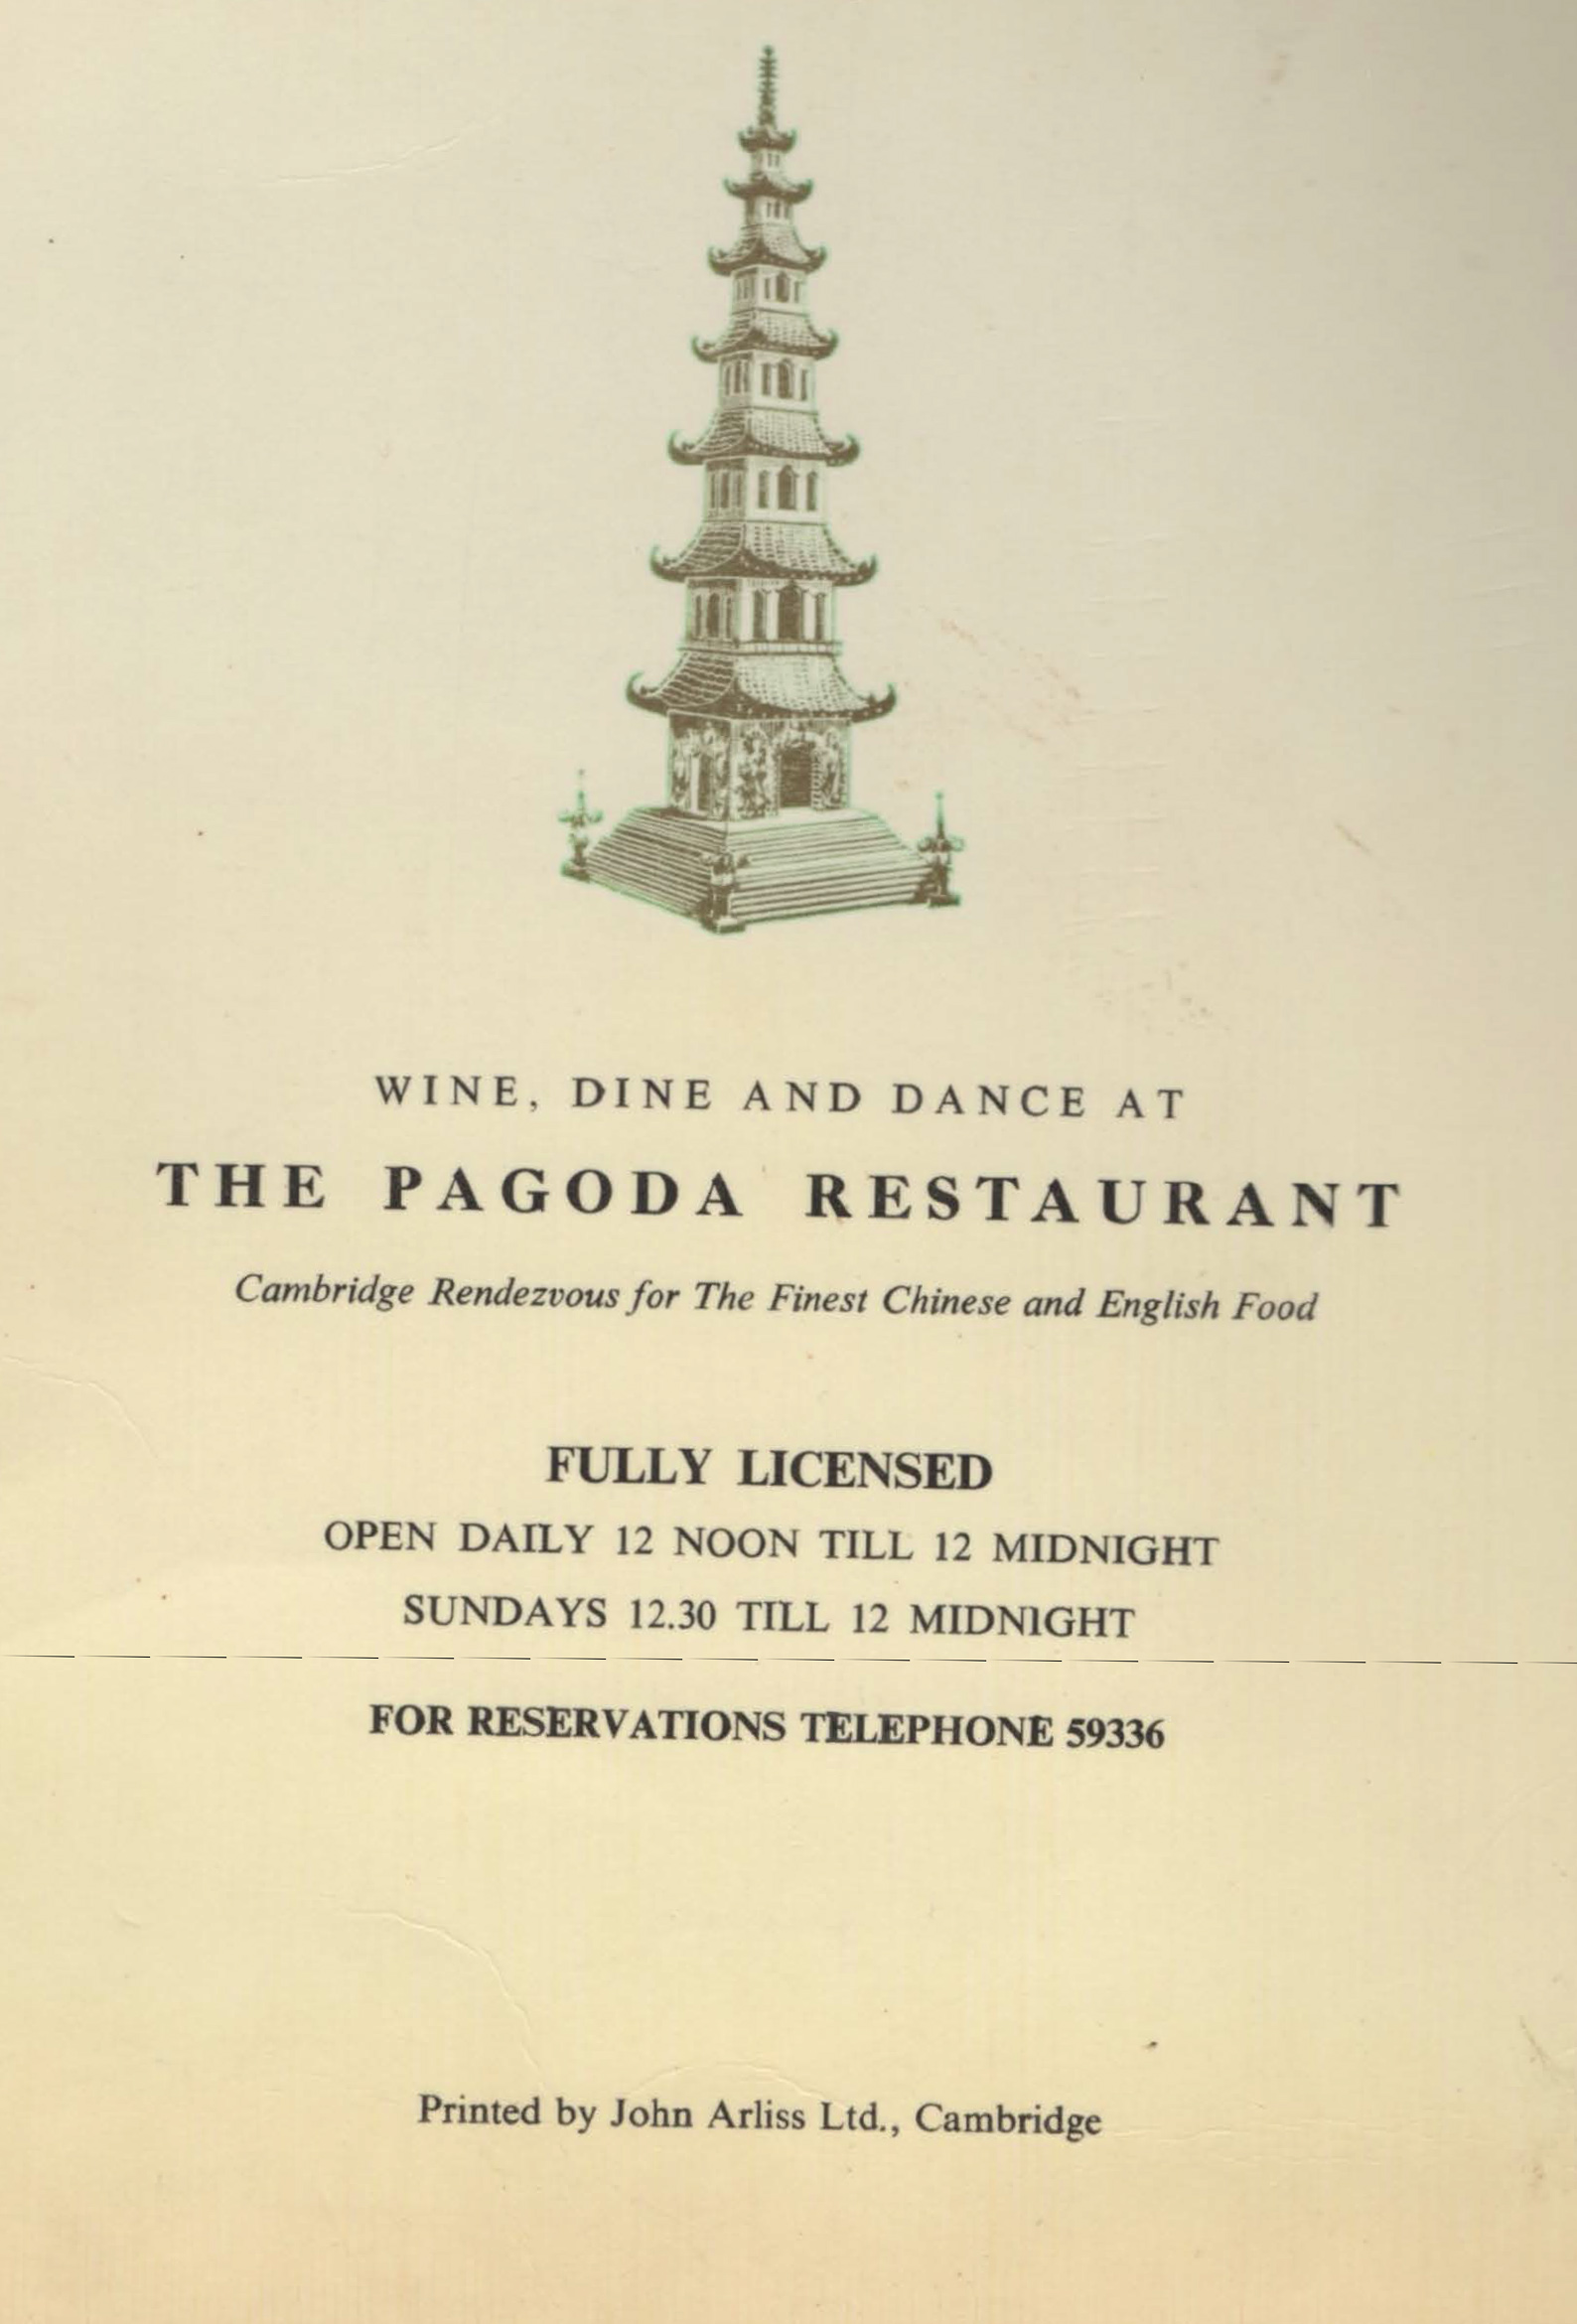 The Pagoda in 1966